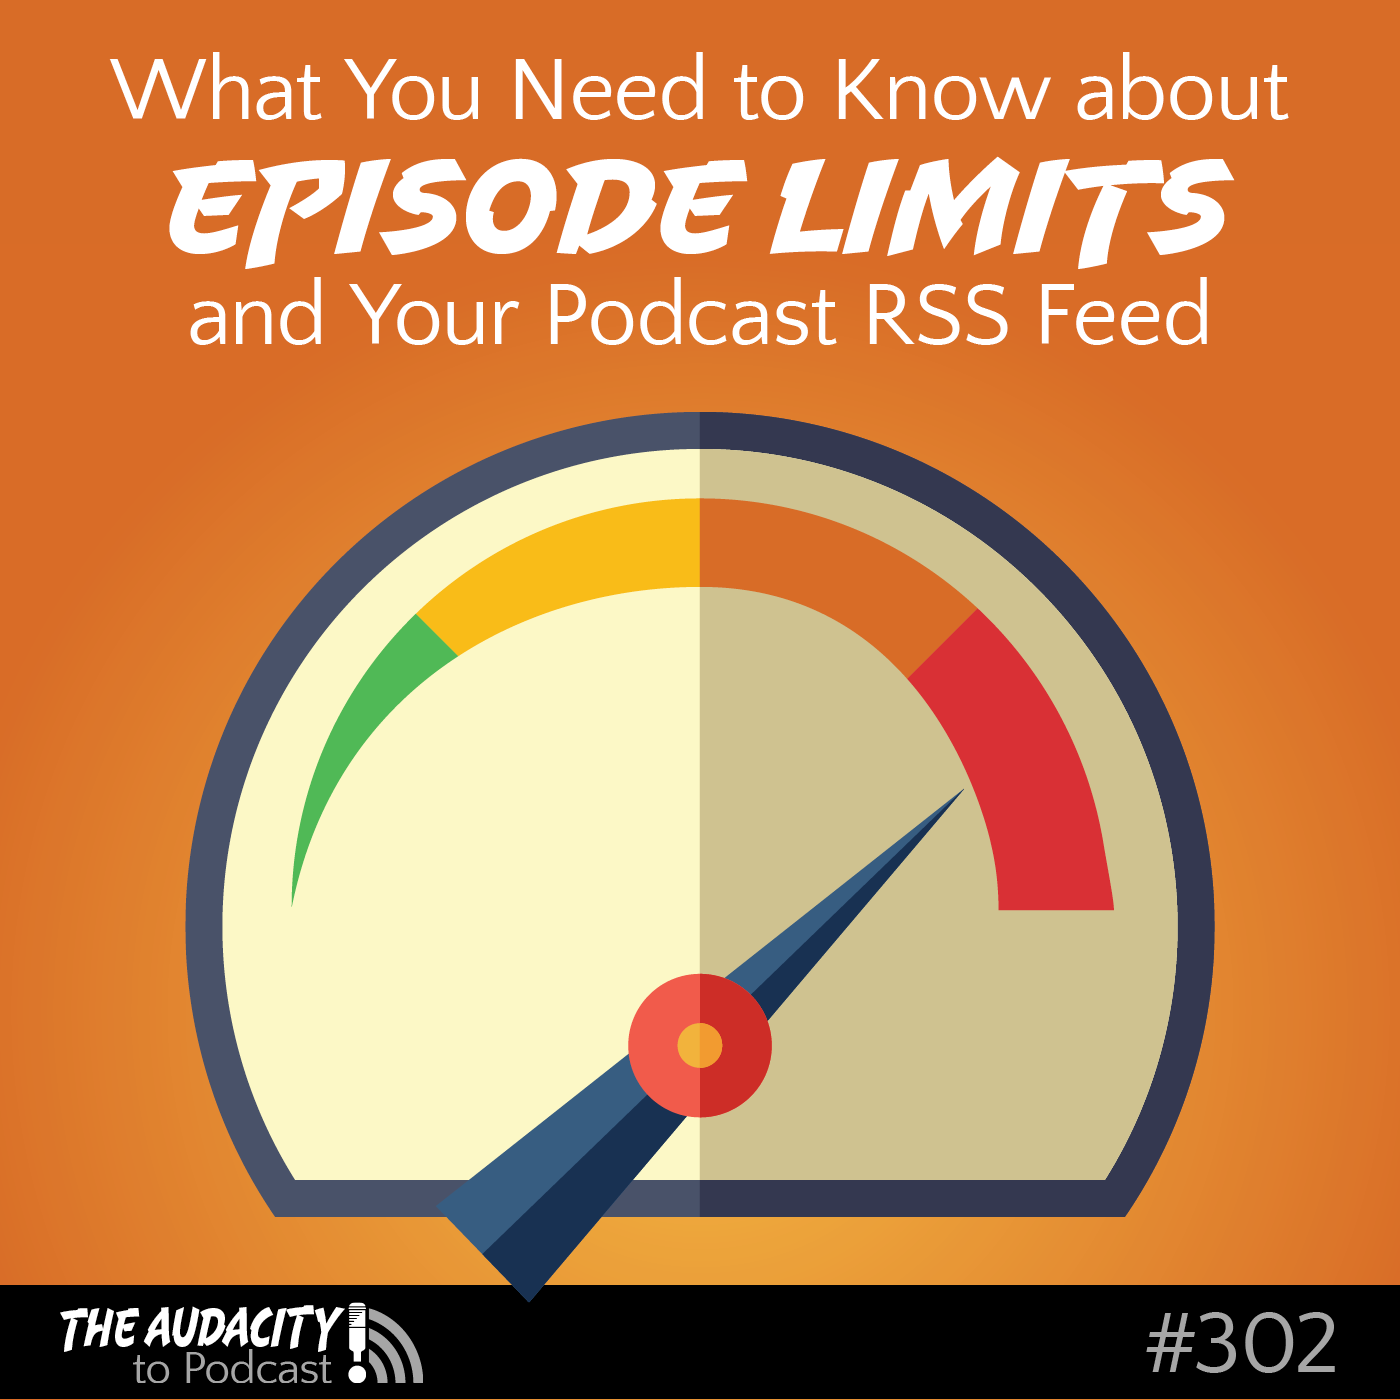 What You Need to Know about Episode Limits and Your Podcast RSS Feed